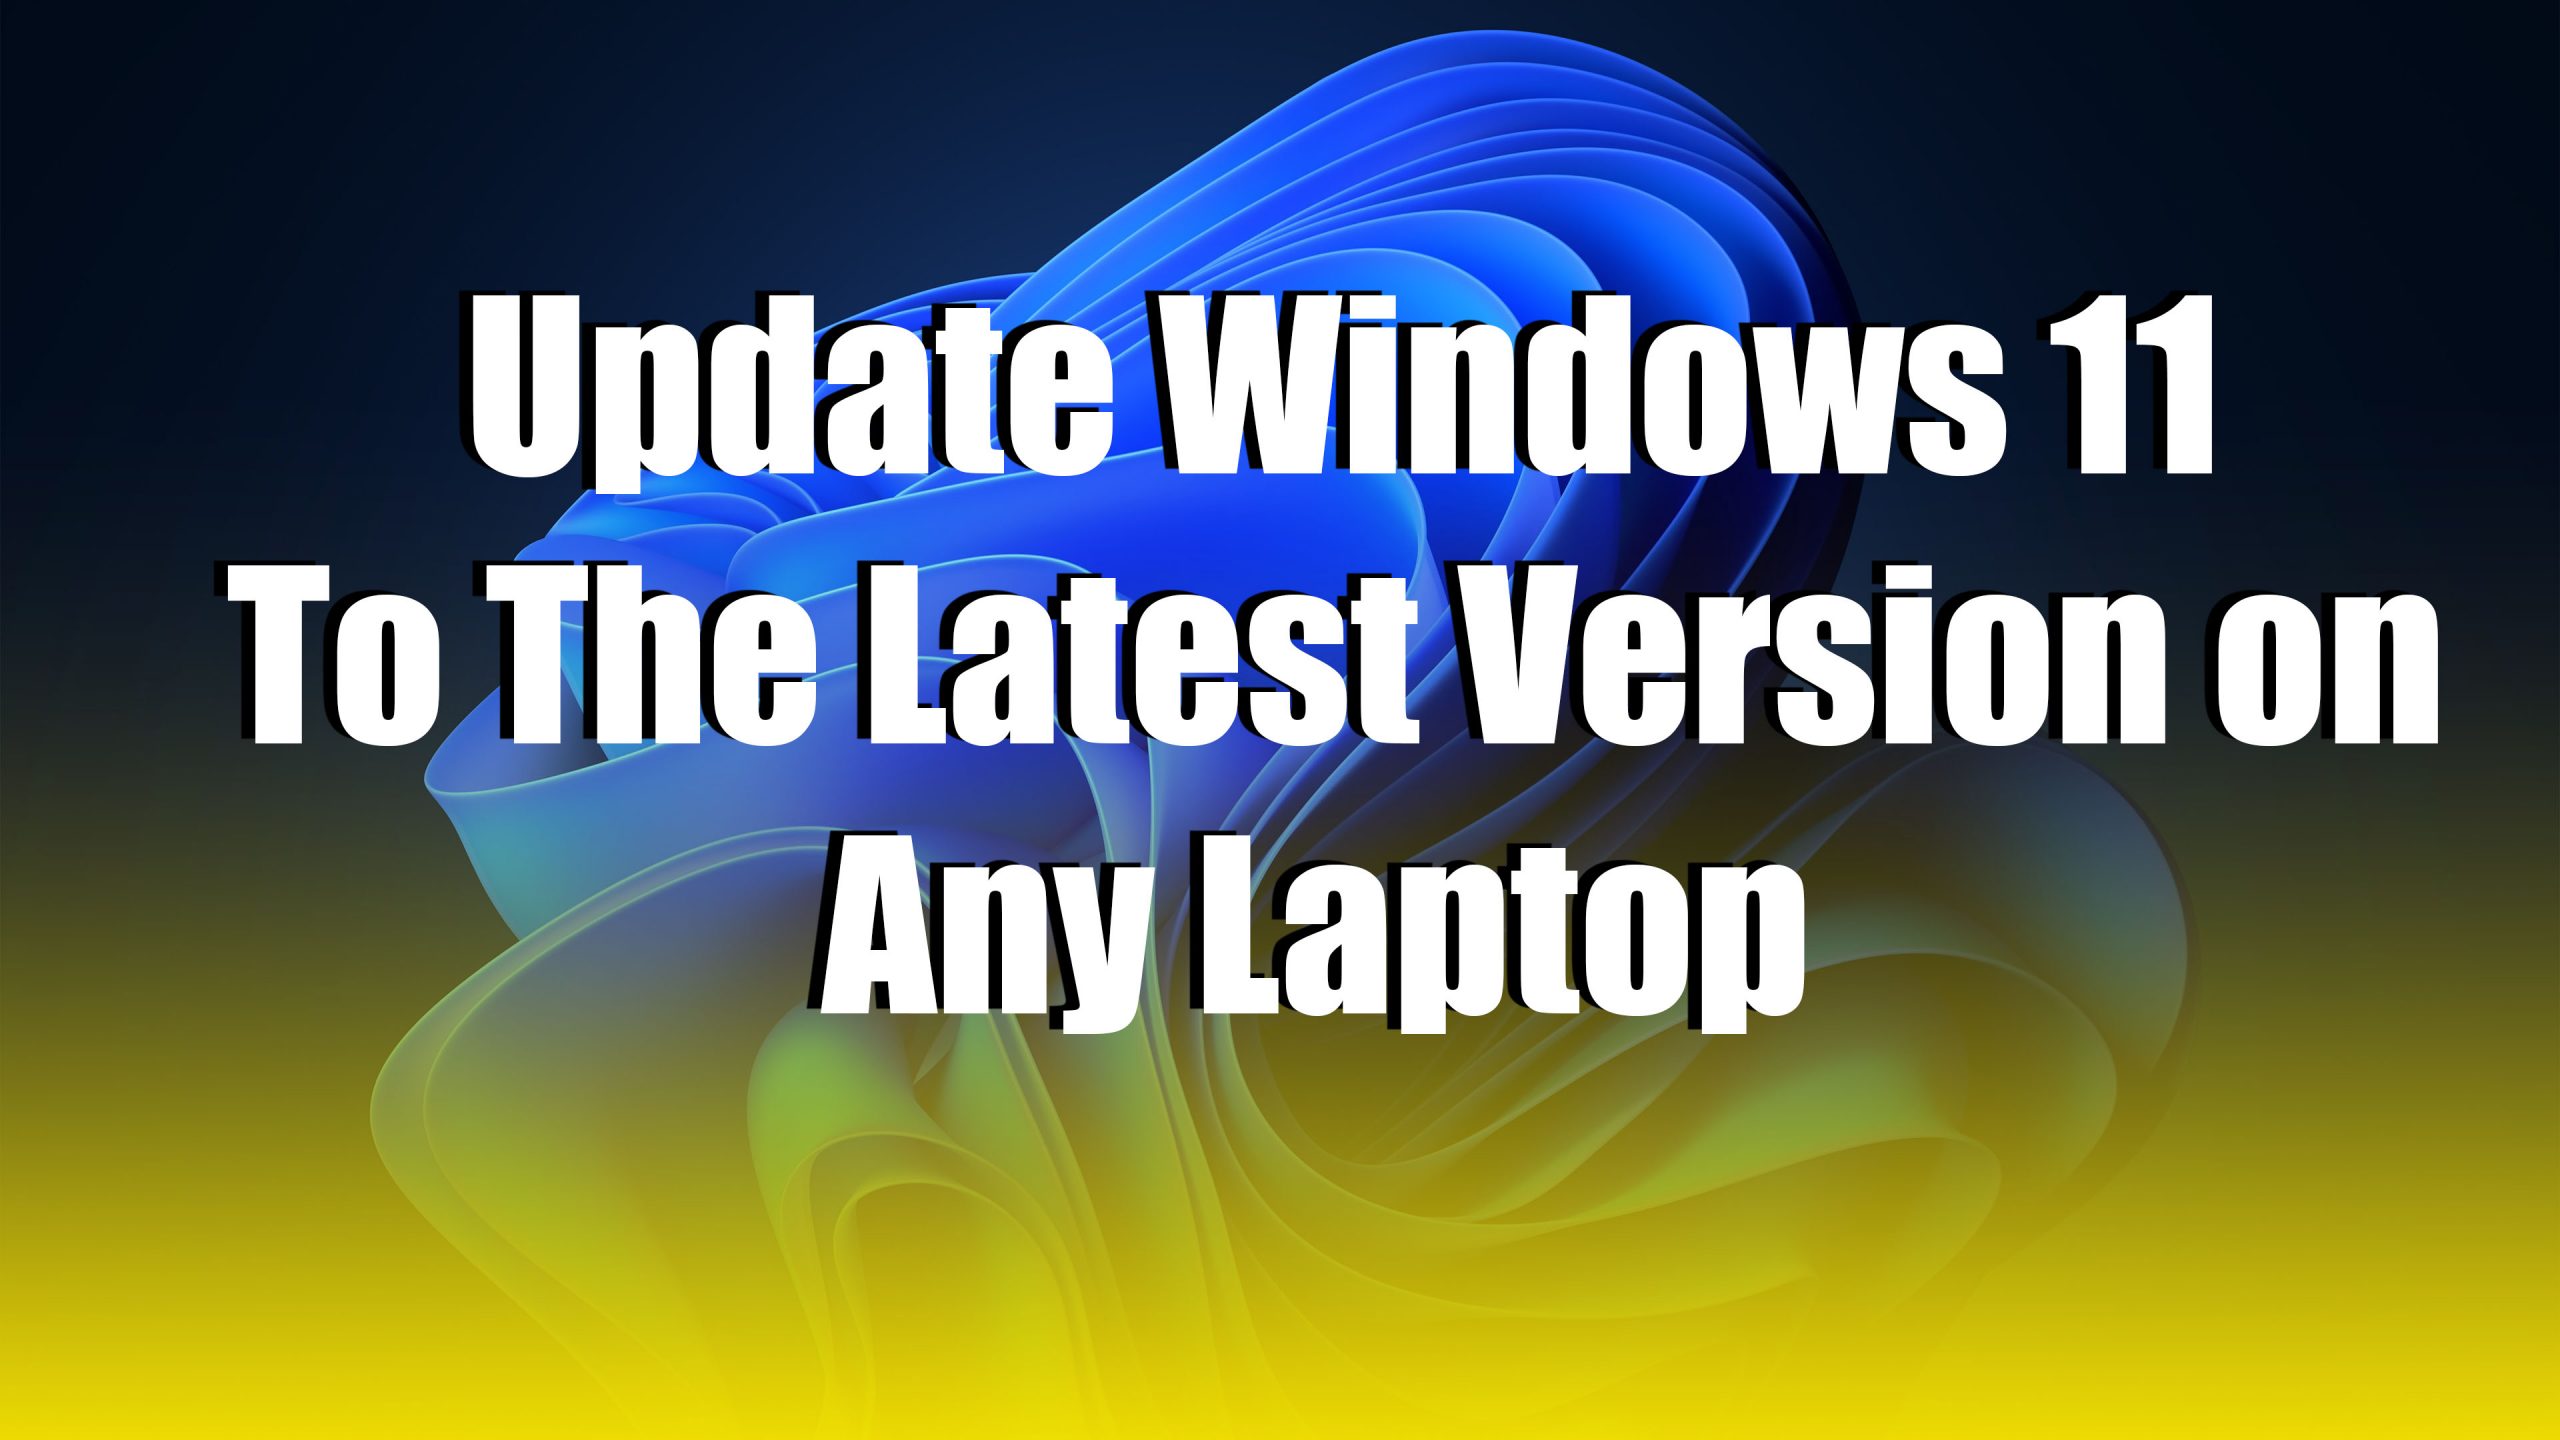 How to Update Windows 11 to the Latest Version on Any Laptop